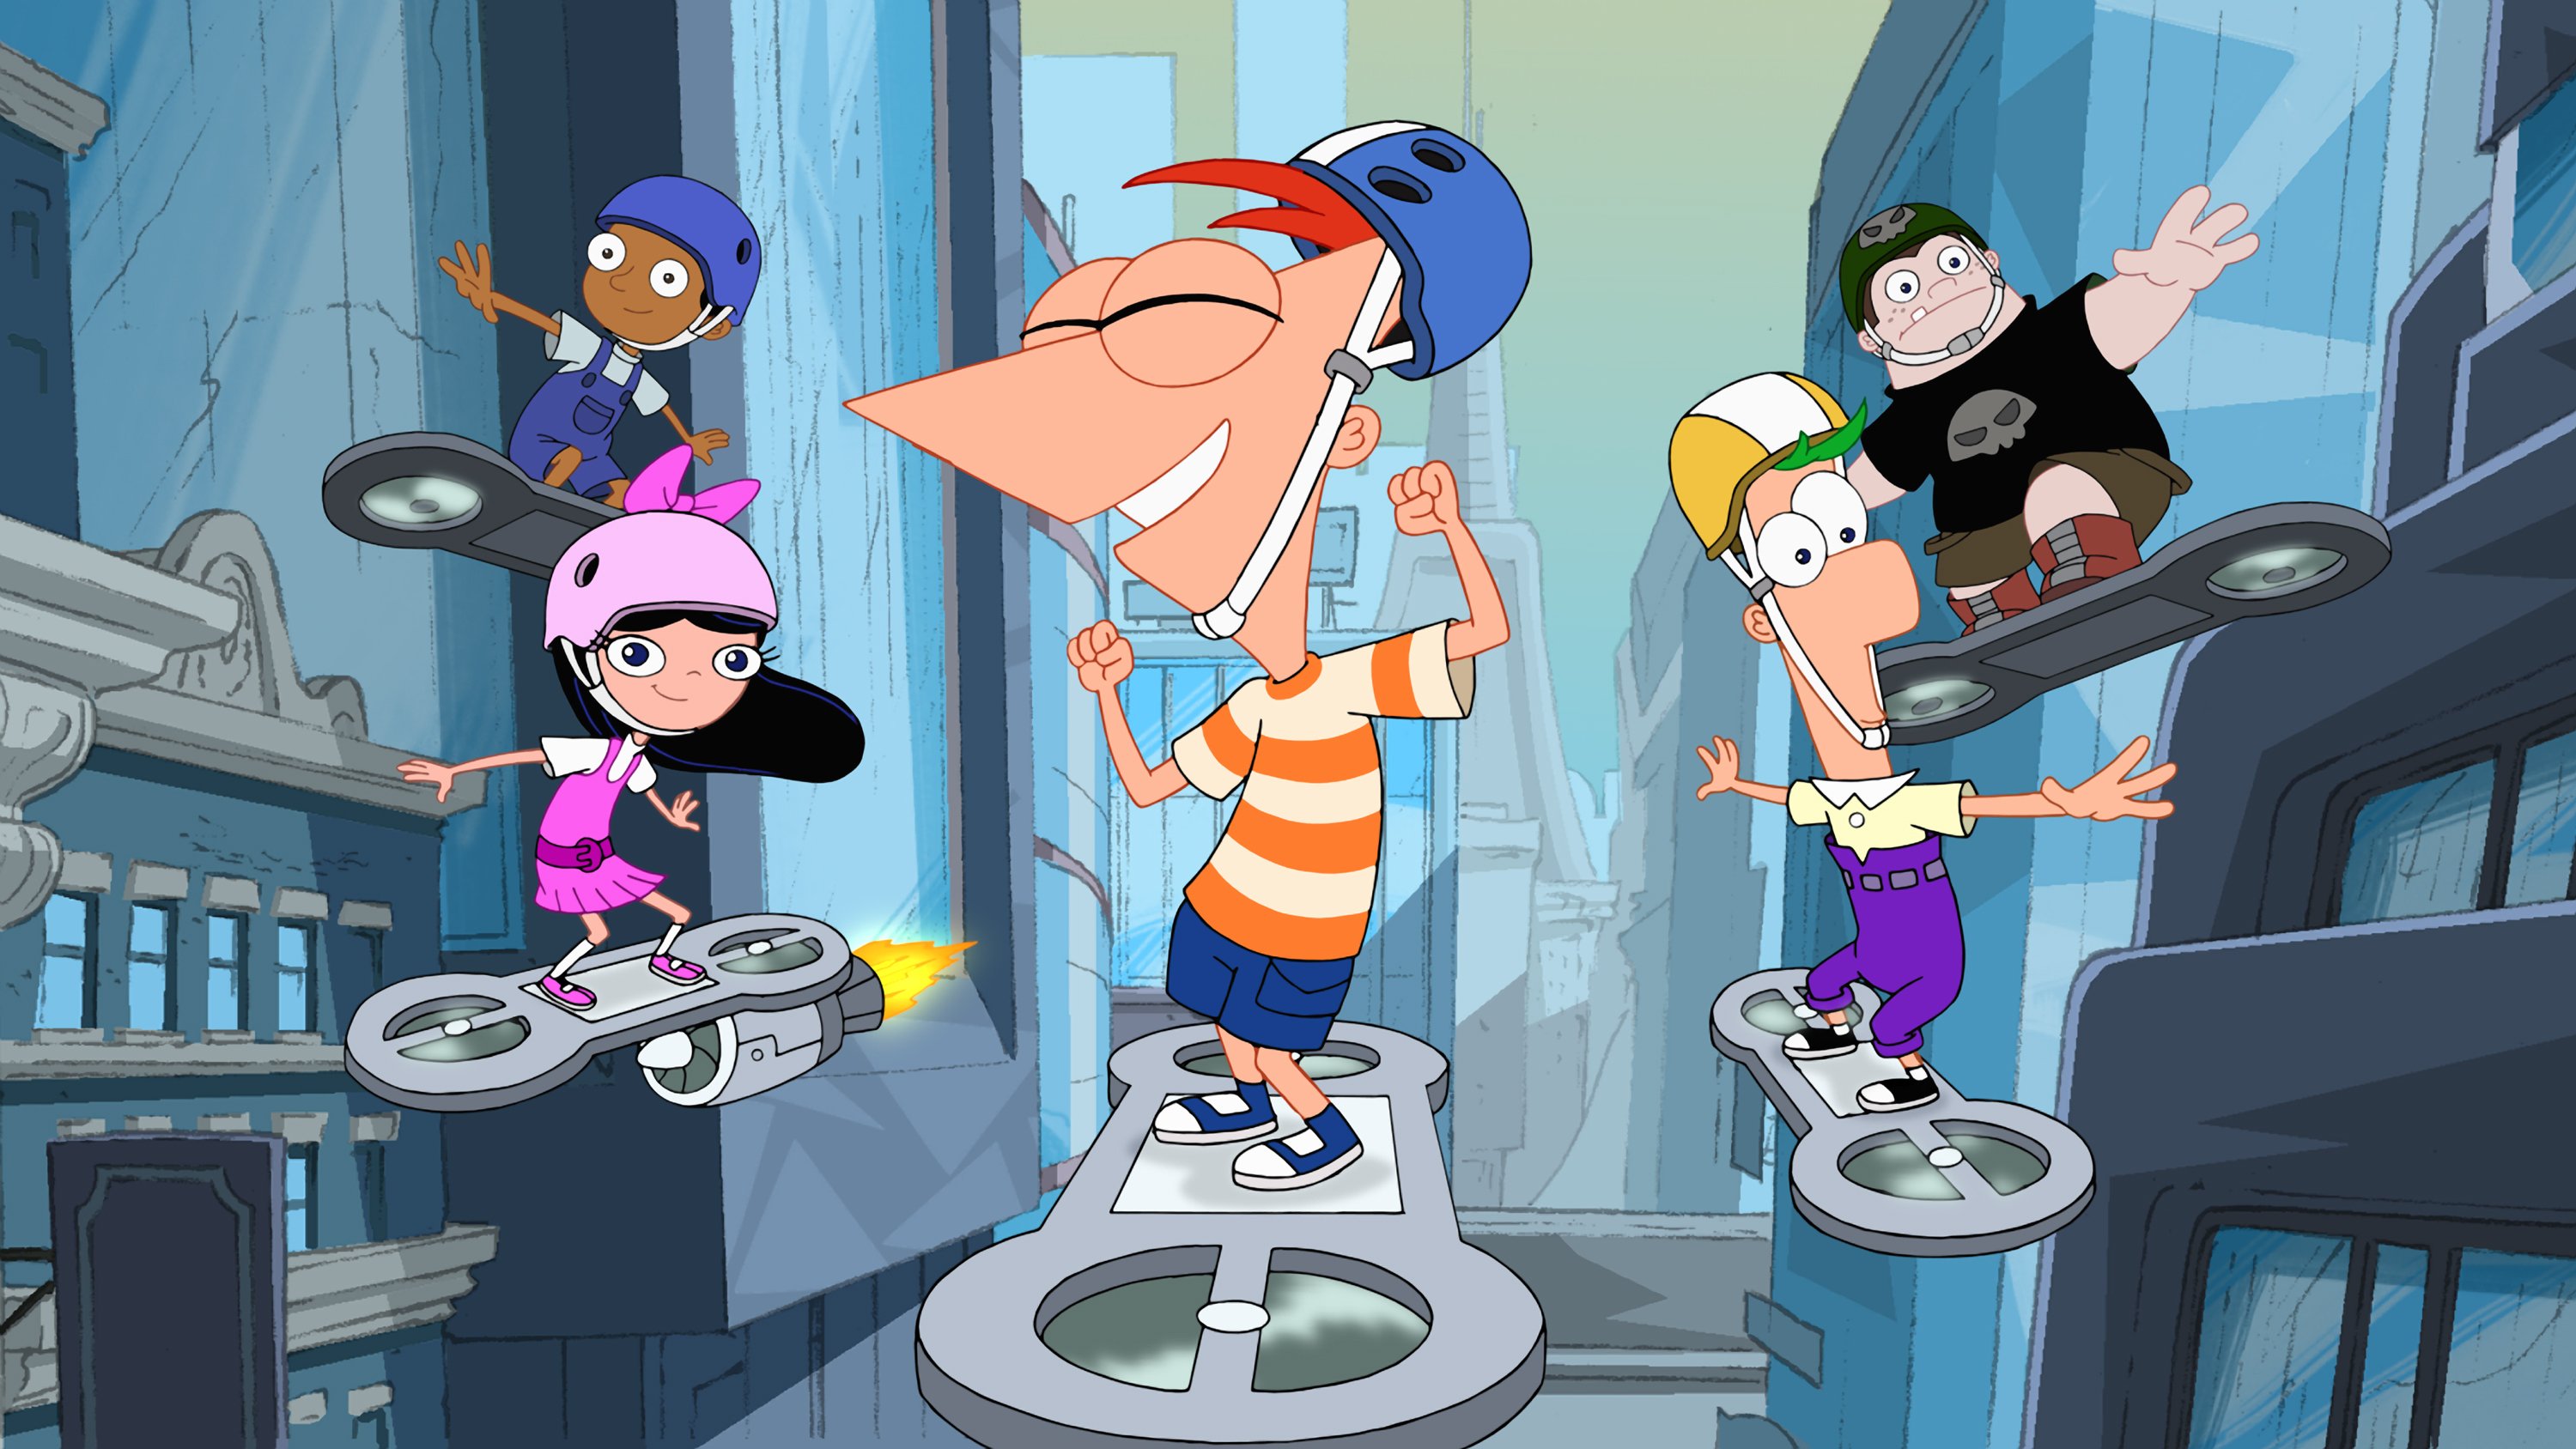 Disney XD's 'Phineas and Ferb' episode titled 'Last Day of Summer'